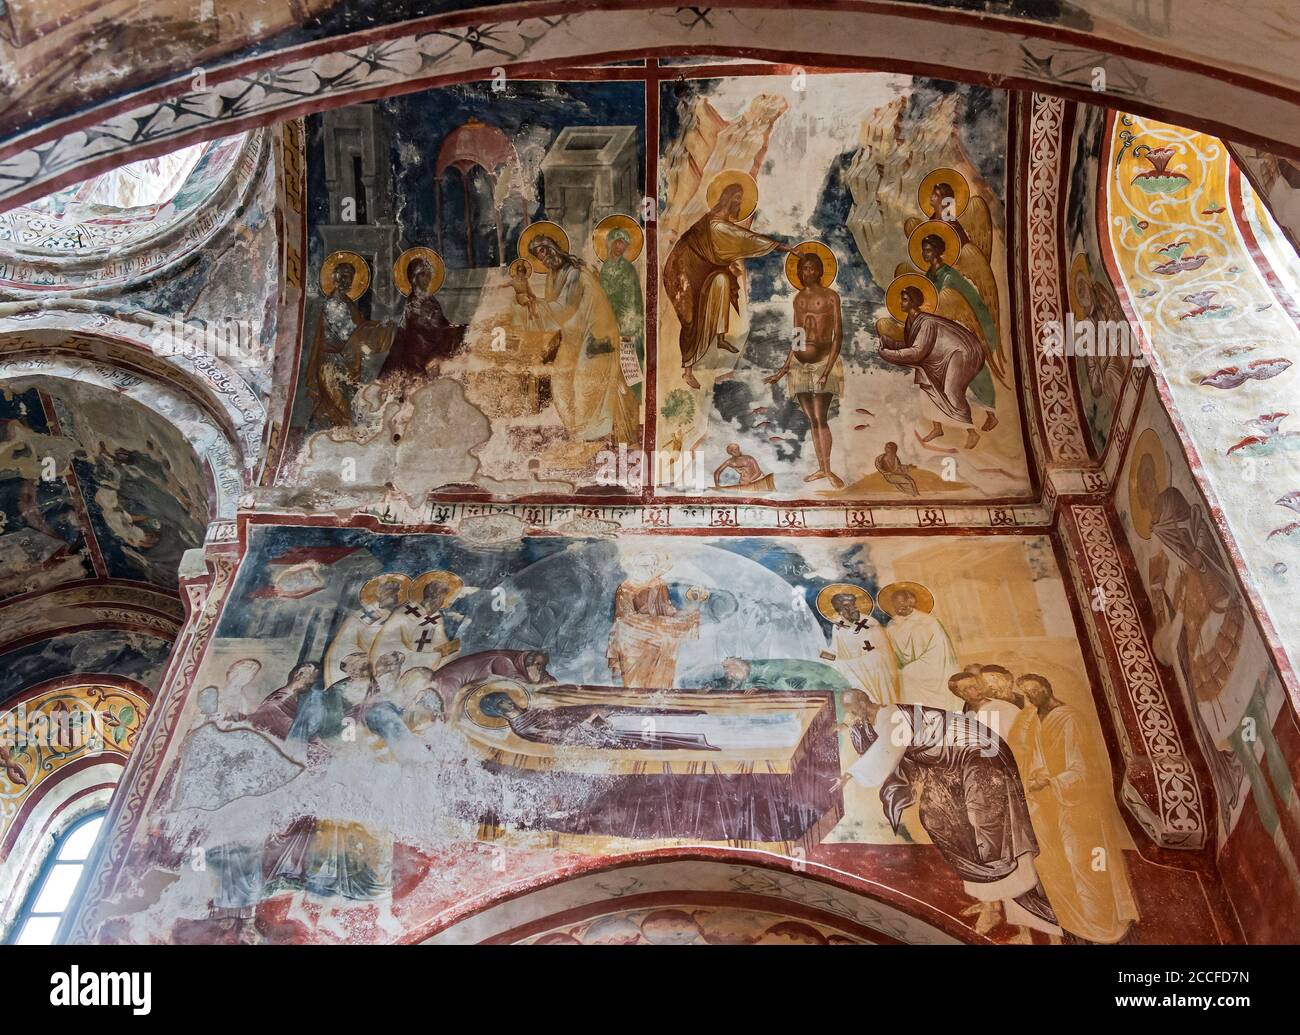 Murals in the Georgian Orthodox Church of St. George with scenes from the life of Christ, medieval monastery complex Gelati, UNESCO World Heritage Sit Stock Photo